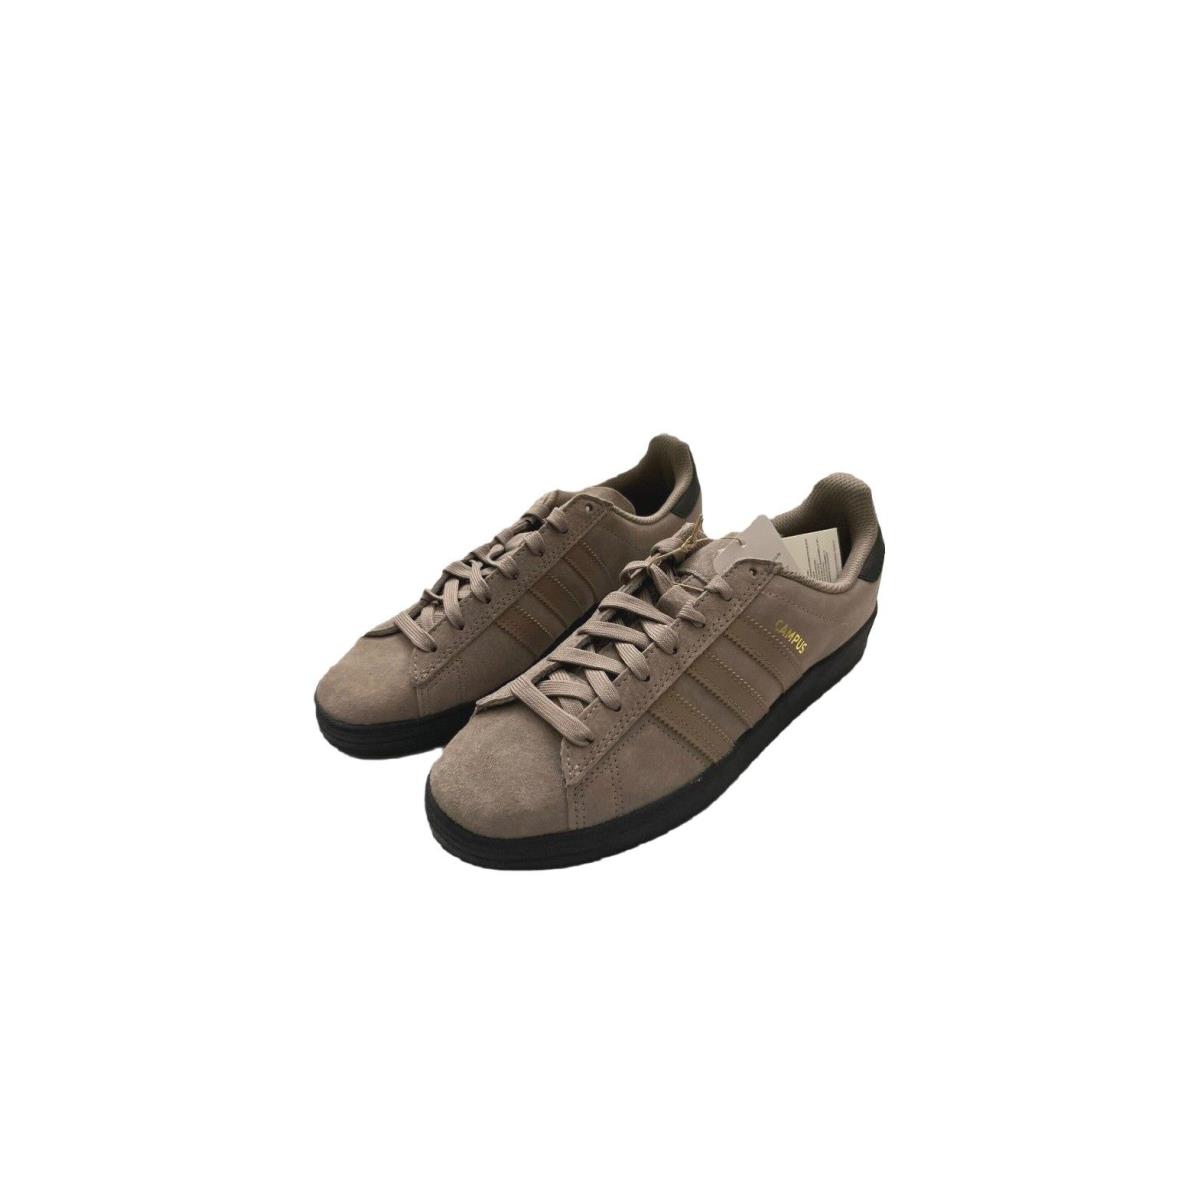 Adidas Men`s Campus Adv Casual/activewear Shoes - Chalky Brown/Chalkie Brown/Gold Metallic